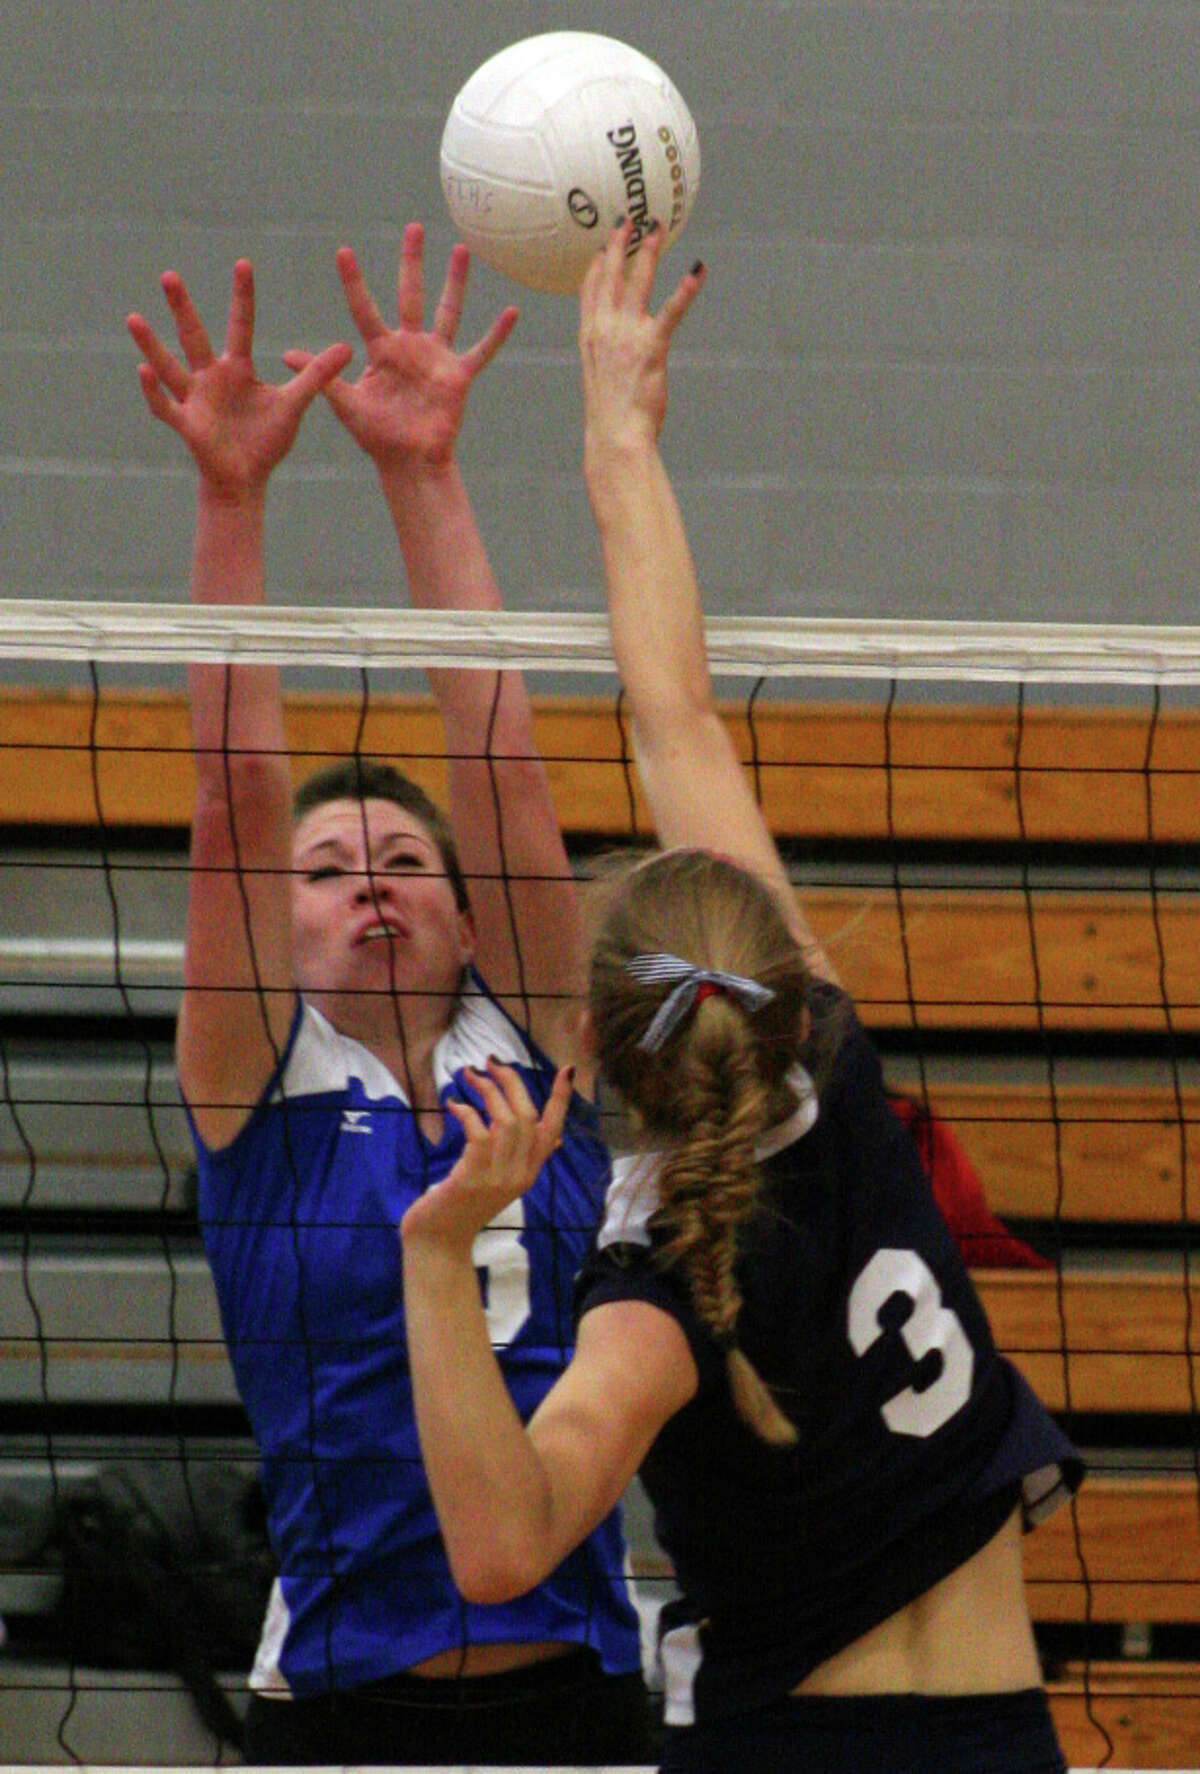 Fairfield Ludlowe's Maddi McCaffrey attempts a block on Staples' Augie Gradoux-Matt in the Falcons' 3-1 win over the Wreckers on Tuesday night at Fairfield Ludlowe High School.